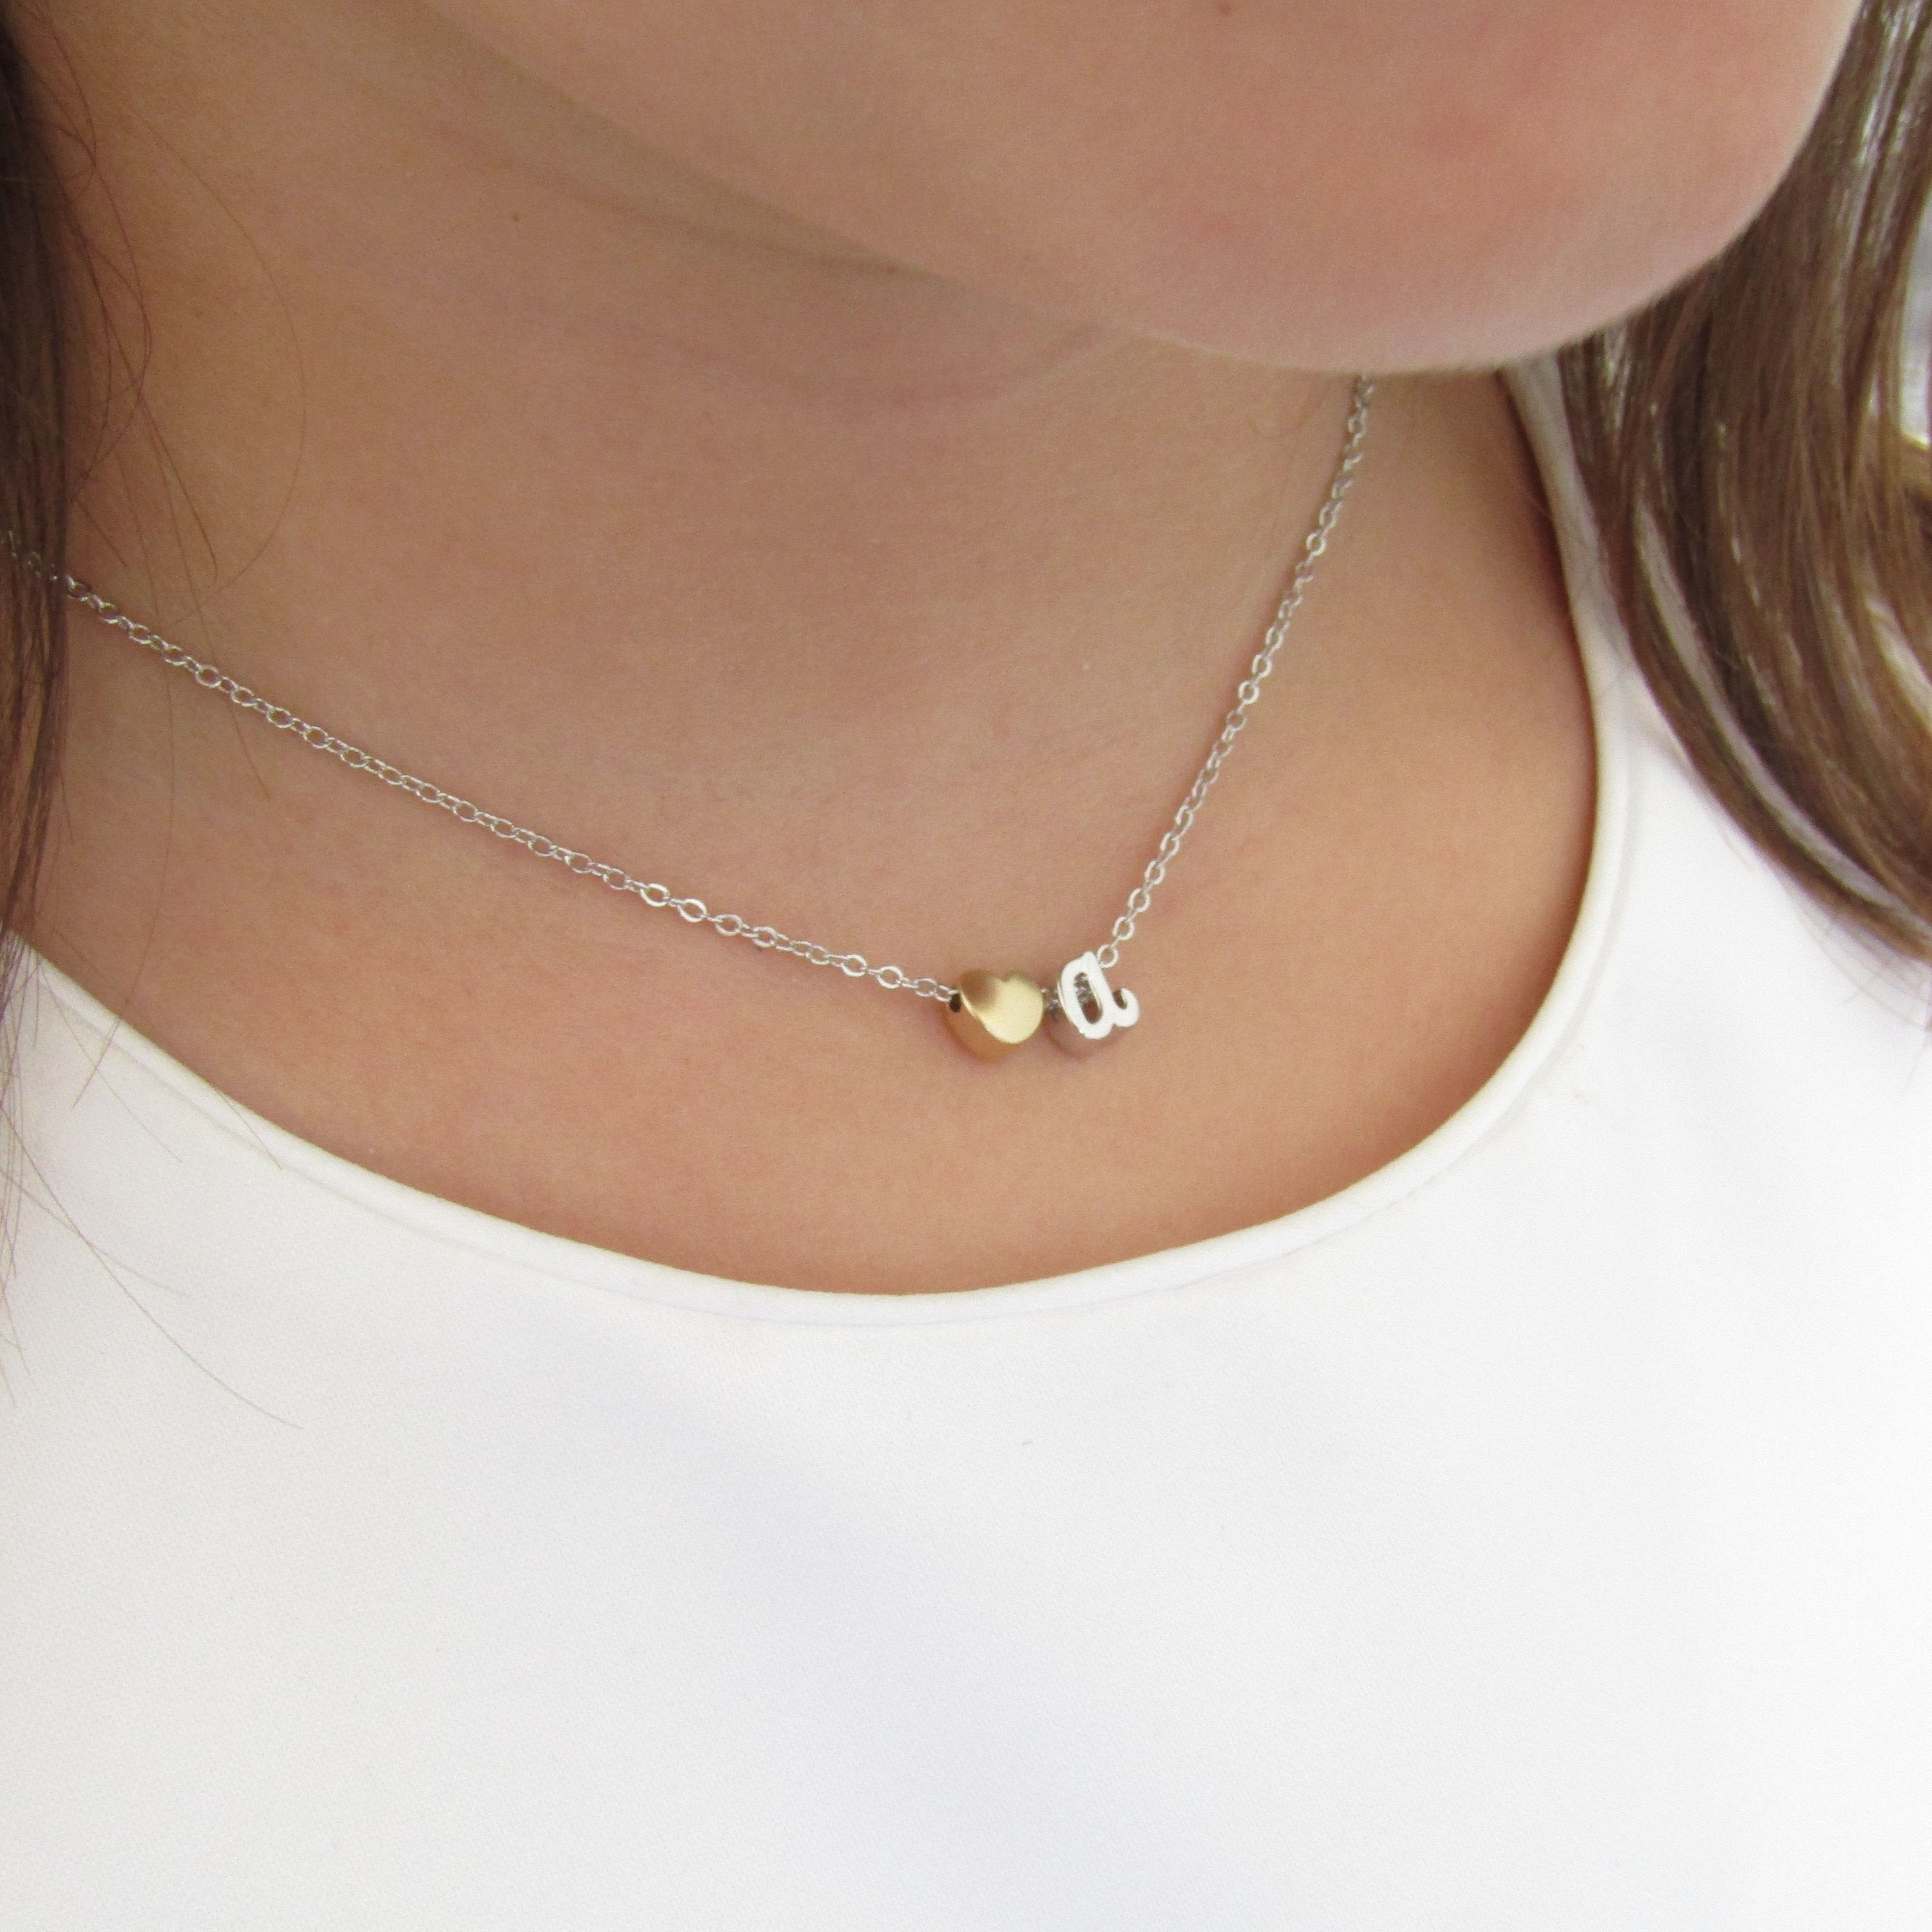 Amazon.com: Gold Initial Disc Necklace, Personalized Jewelry with Children's  Initials, Gift for Girlfriend, Monogram Gold Necklace, Single Initial or Up  to 5, 14k Gold Filled Chain : Handmade Products